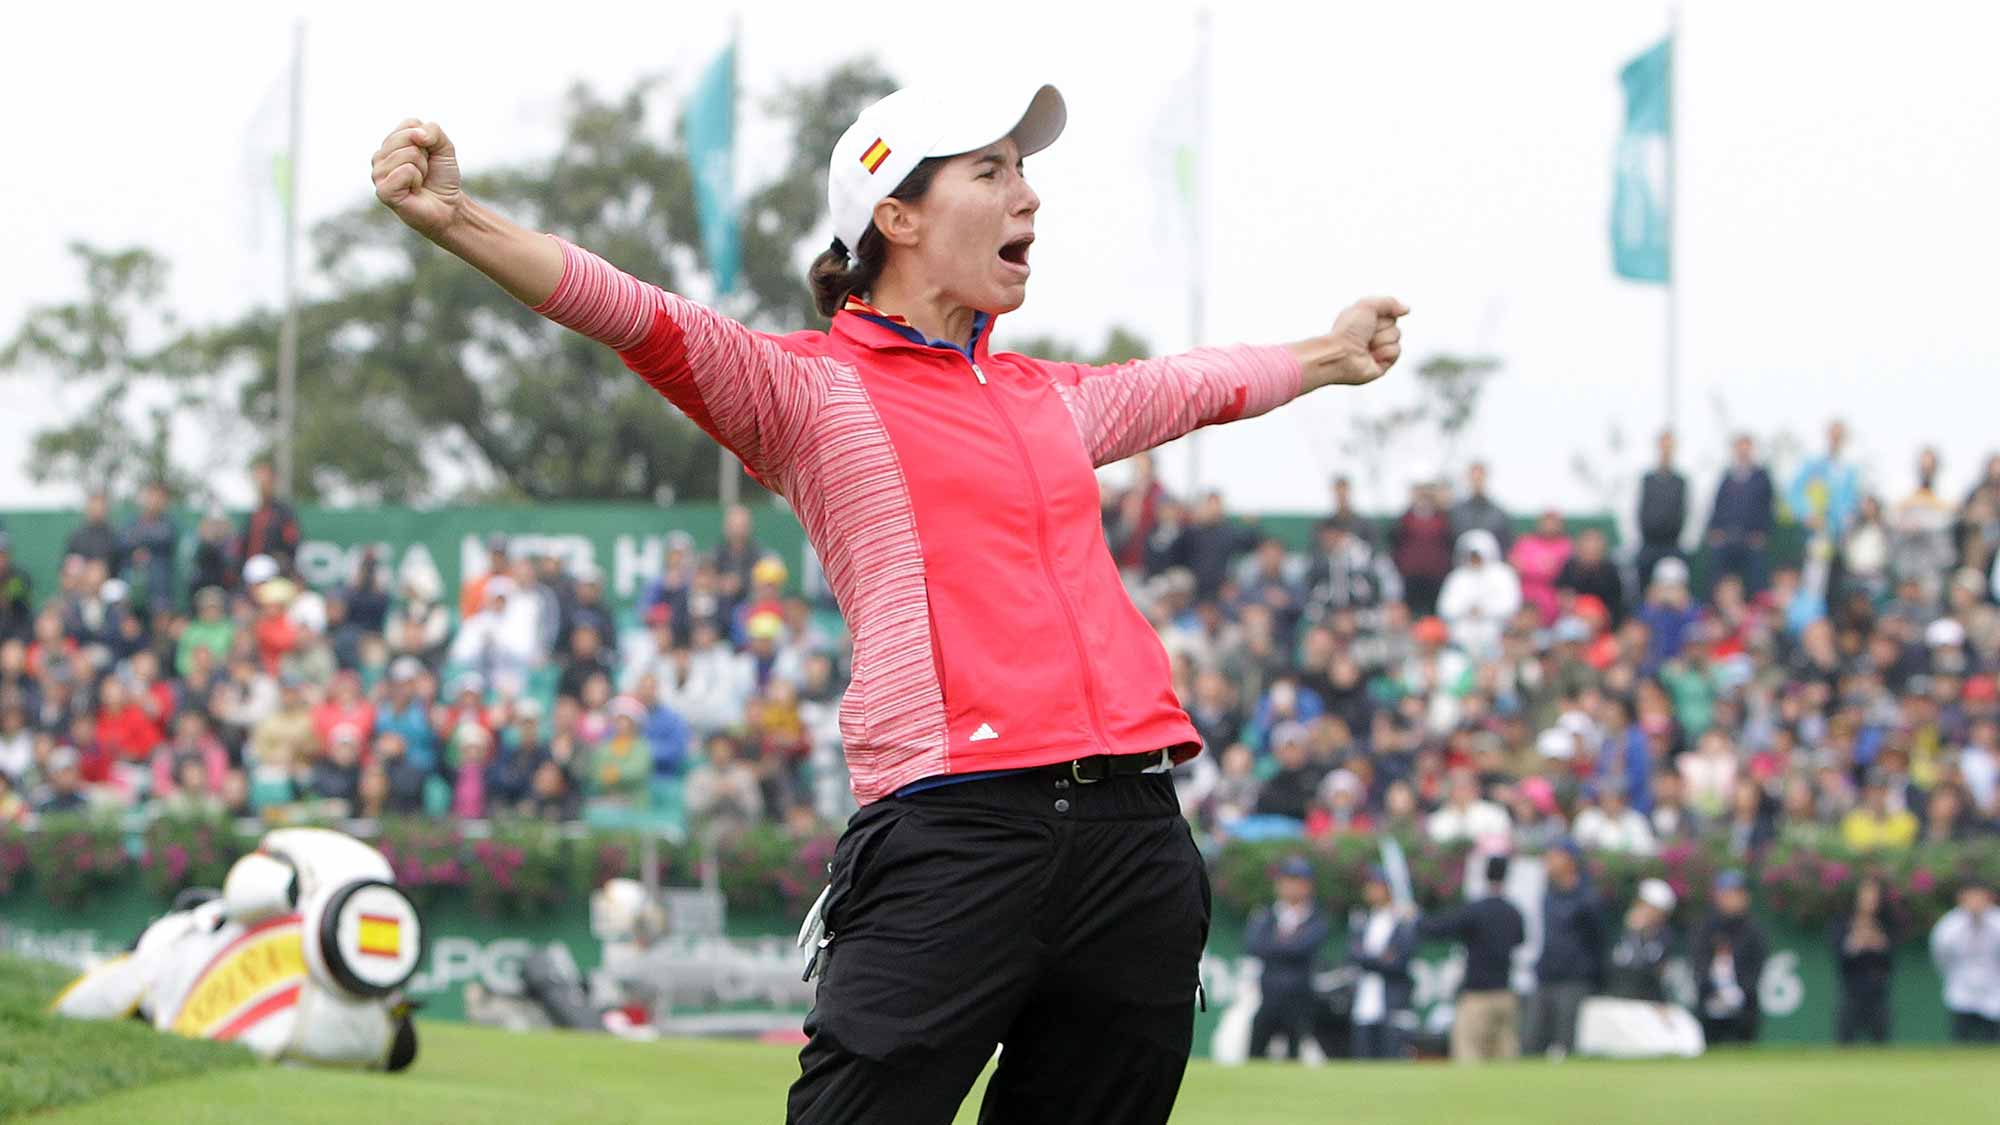 Carlota Ciganda of Spain celebrates after a winning putt on the 18th green during the final round of the LPGA KEB-Hana Bank Championship at the Sky 72 Golf Club Ocean Course